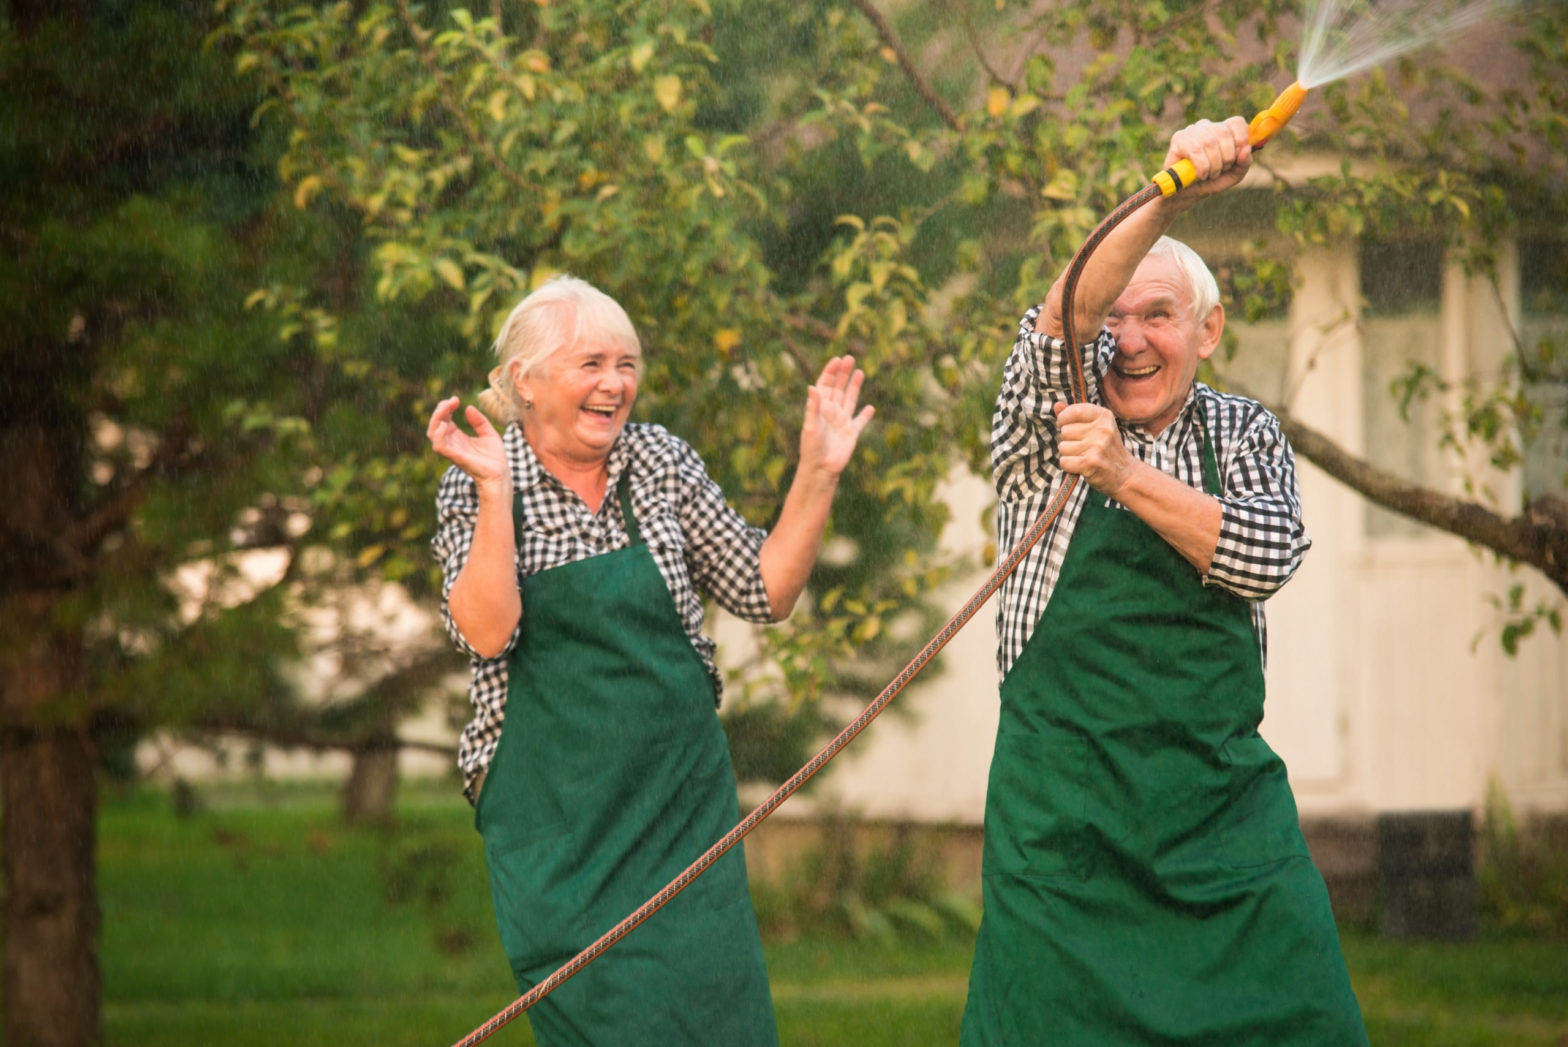 elderly couple outside playing with hose